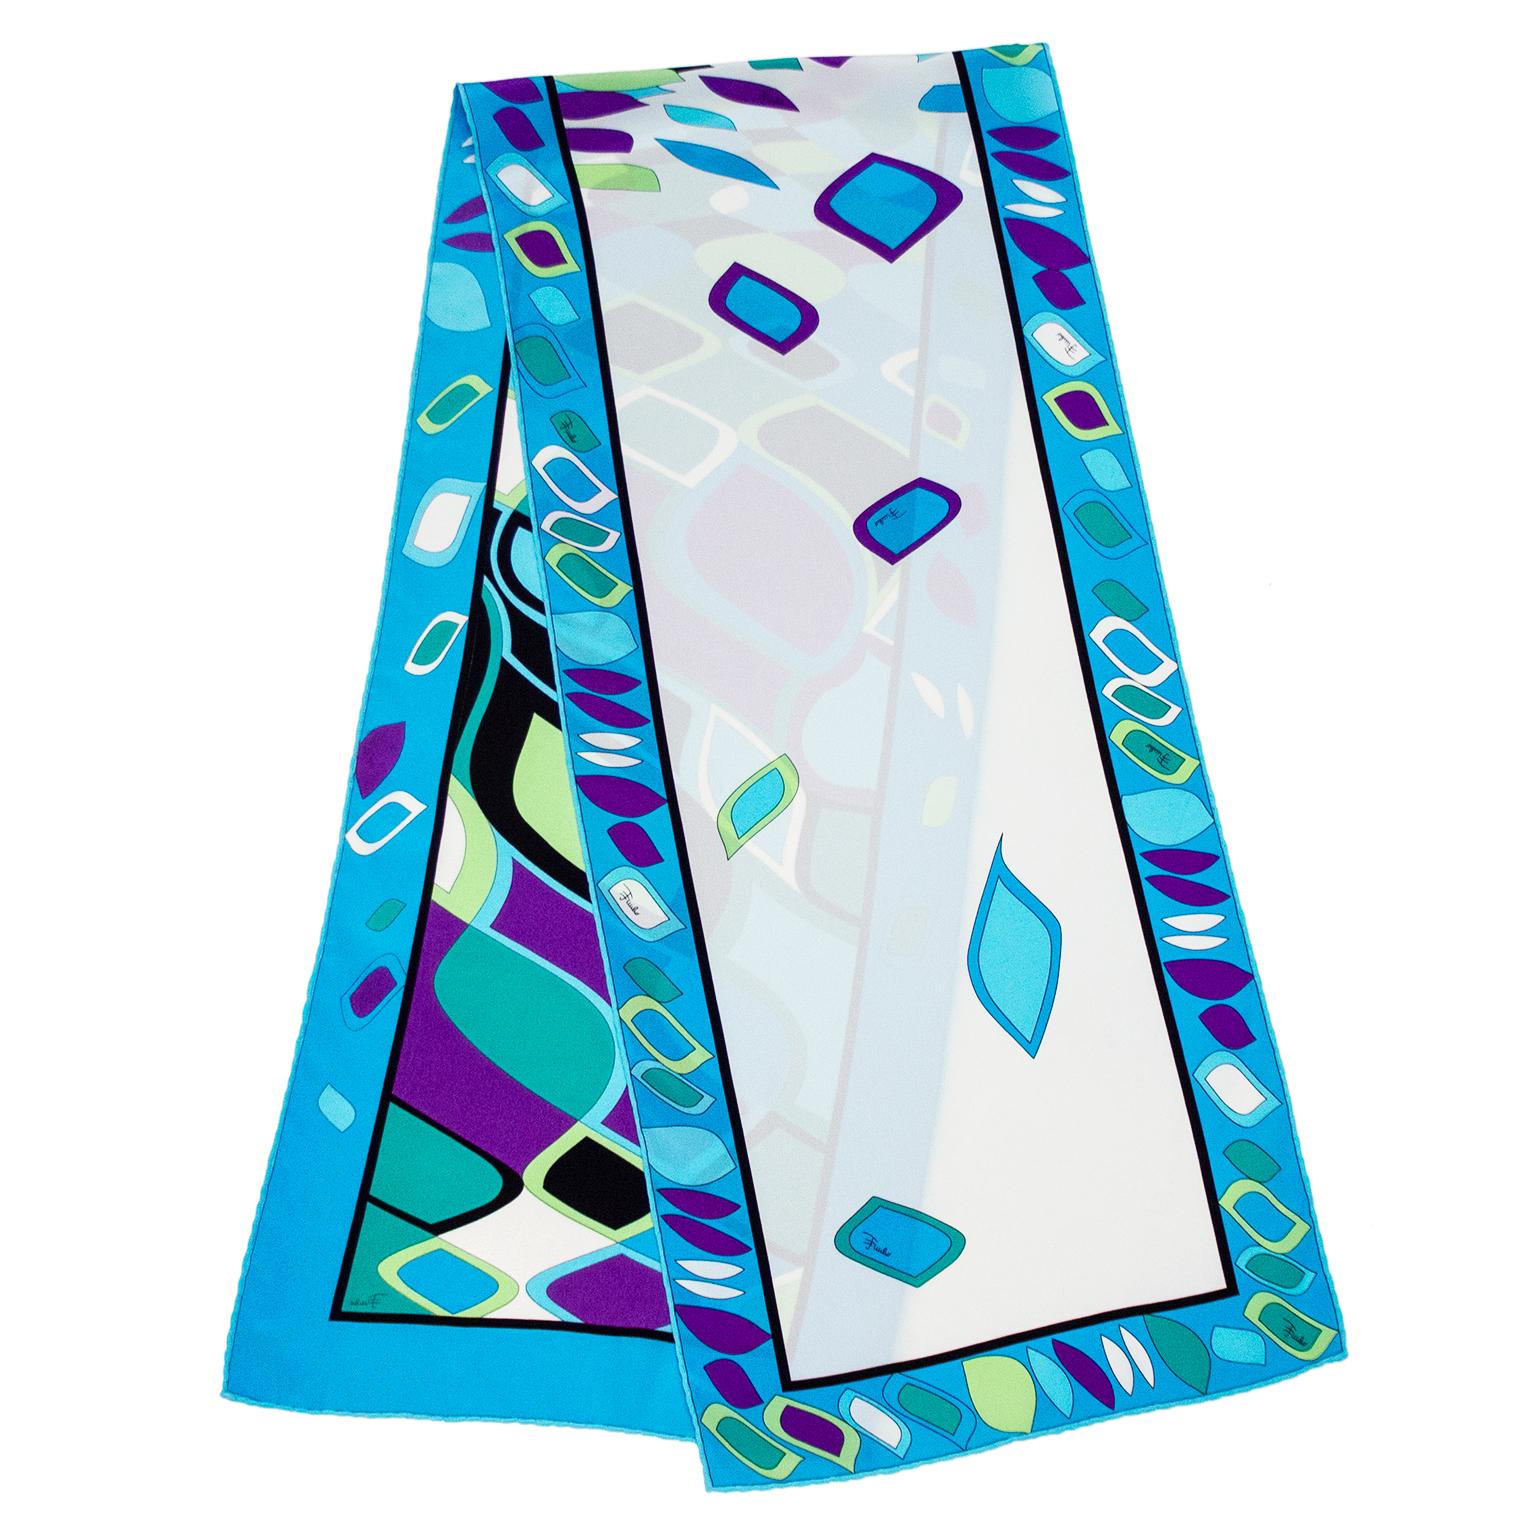 Narrow Emilio Pucci silk scarf from the 1990s with a classic Pucci abstract geometric print. Shades of blue, green and purple. The centre features a distorted geometric print that fades into a few floating shapes on the white background on one side.